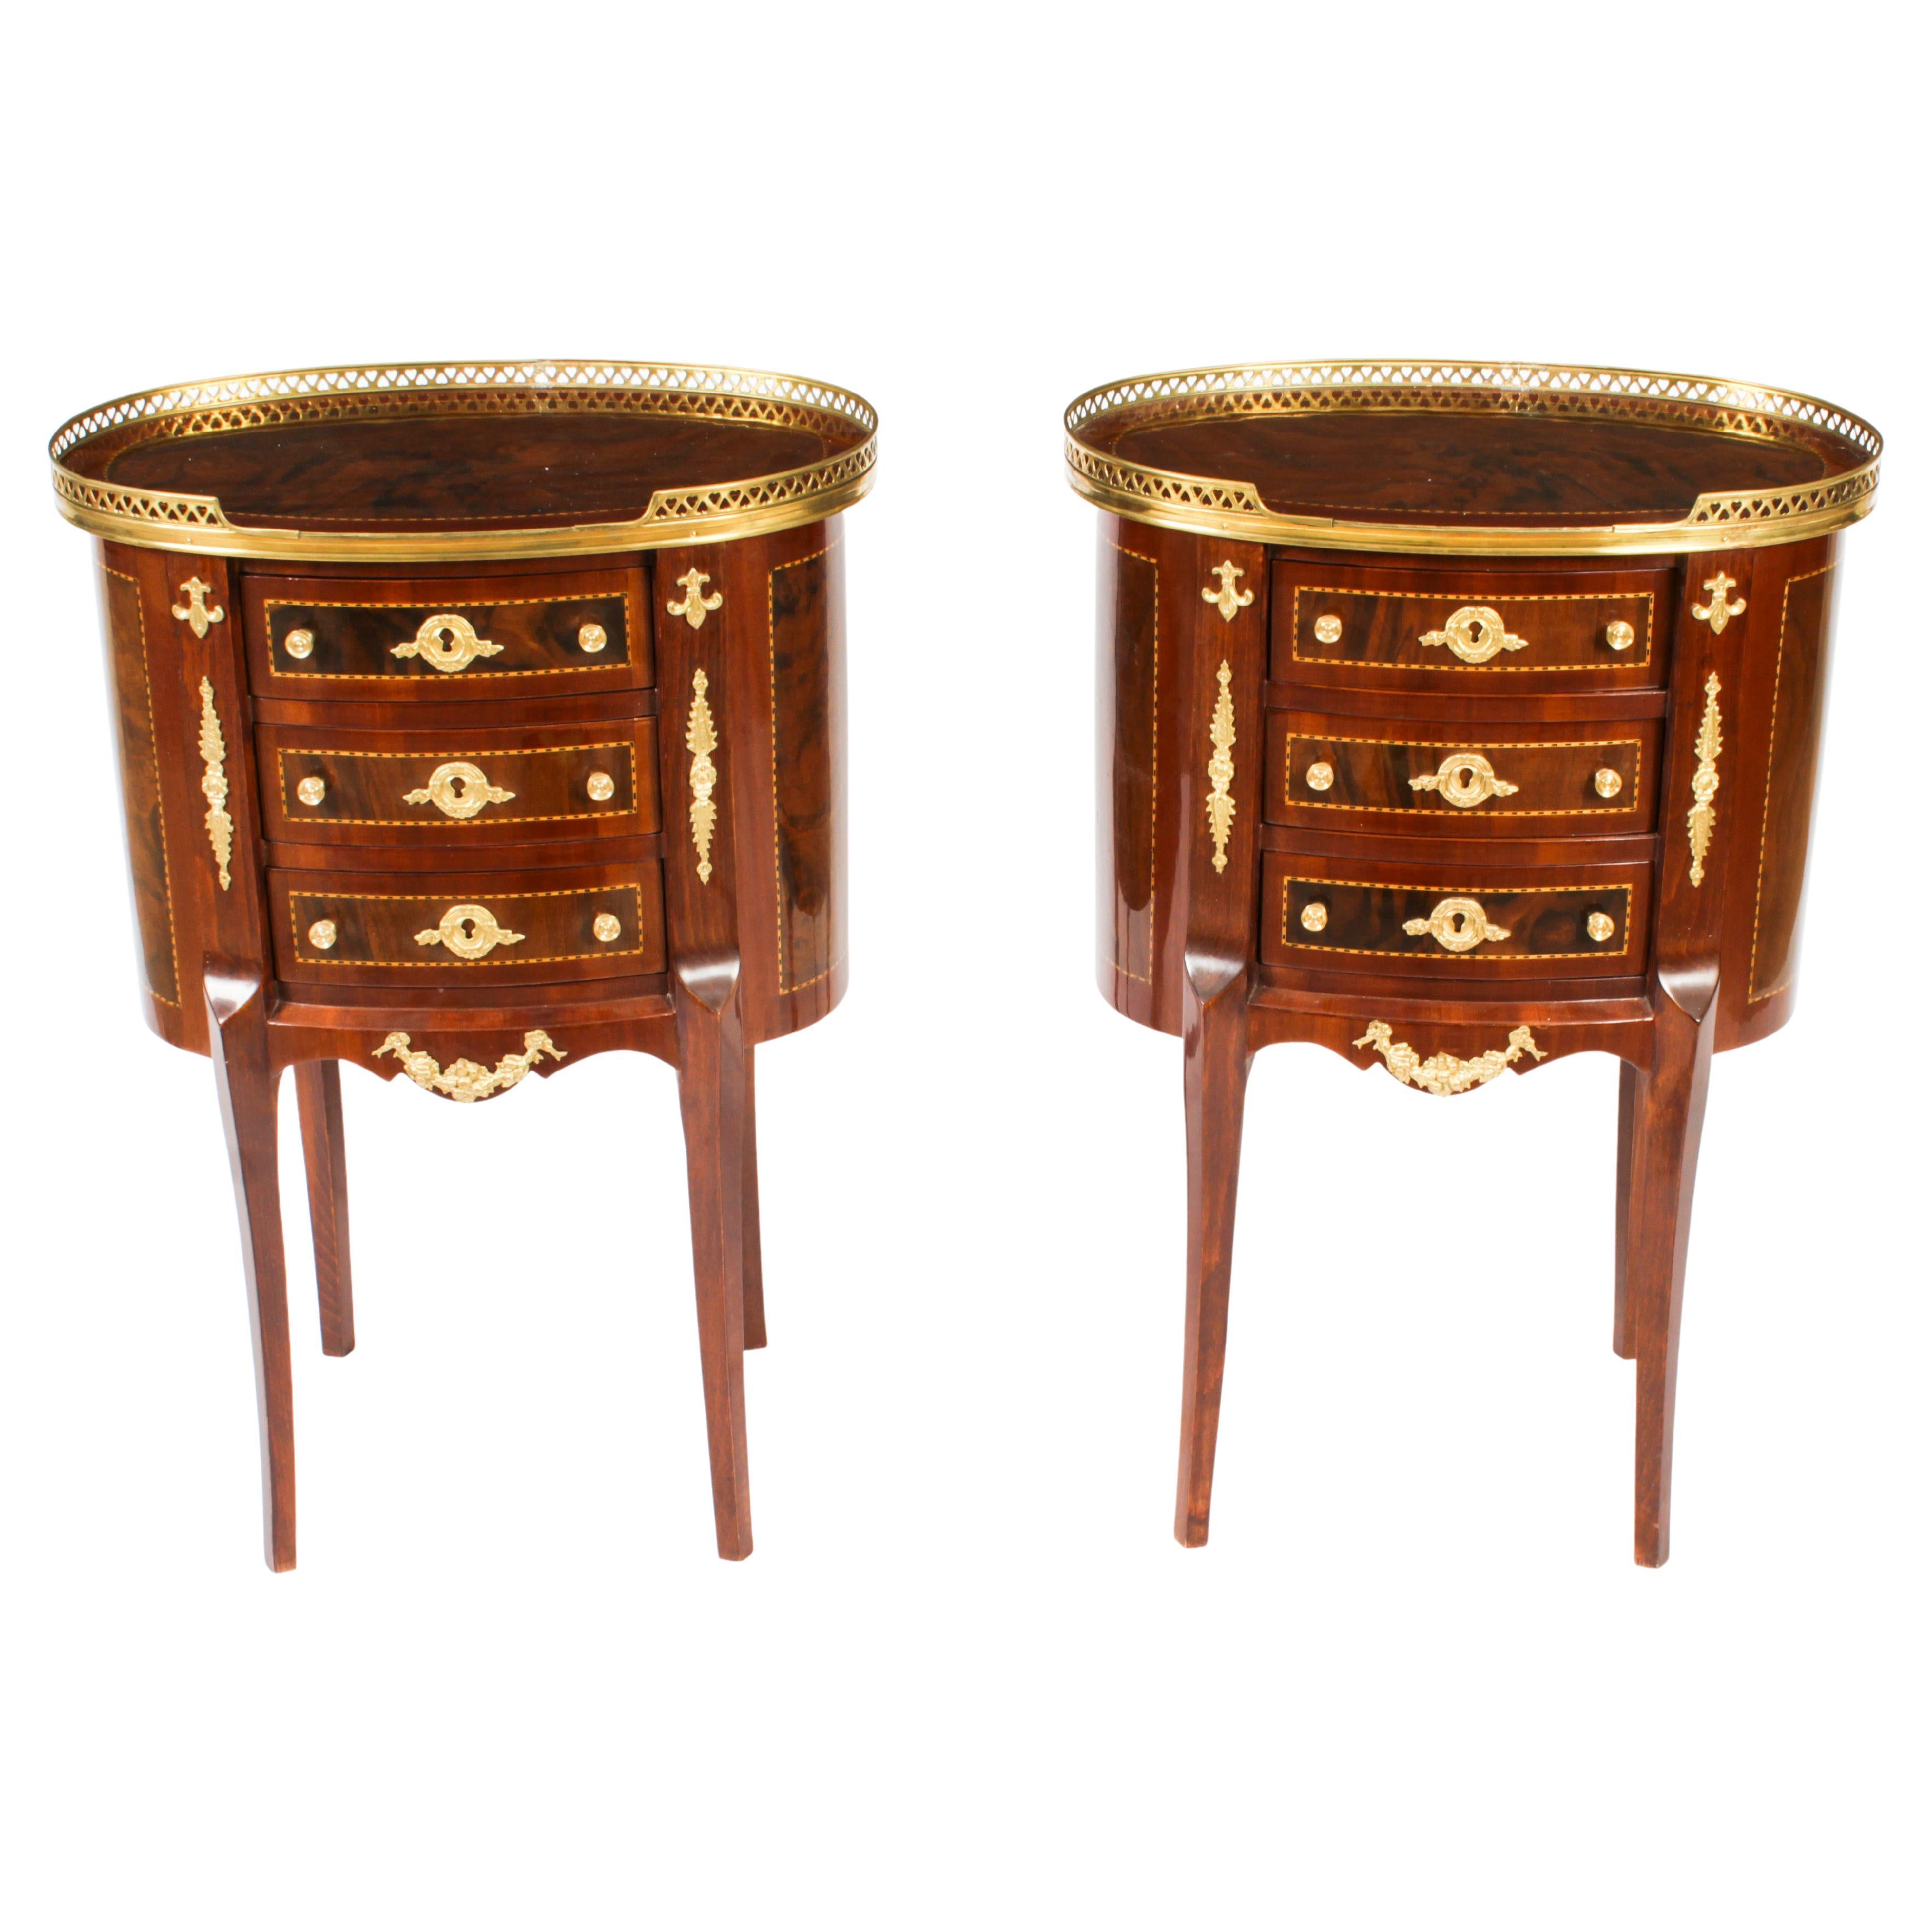 Vintage Pair French Louis Revival Walnut Bedside Cabinets 20th Century